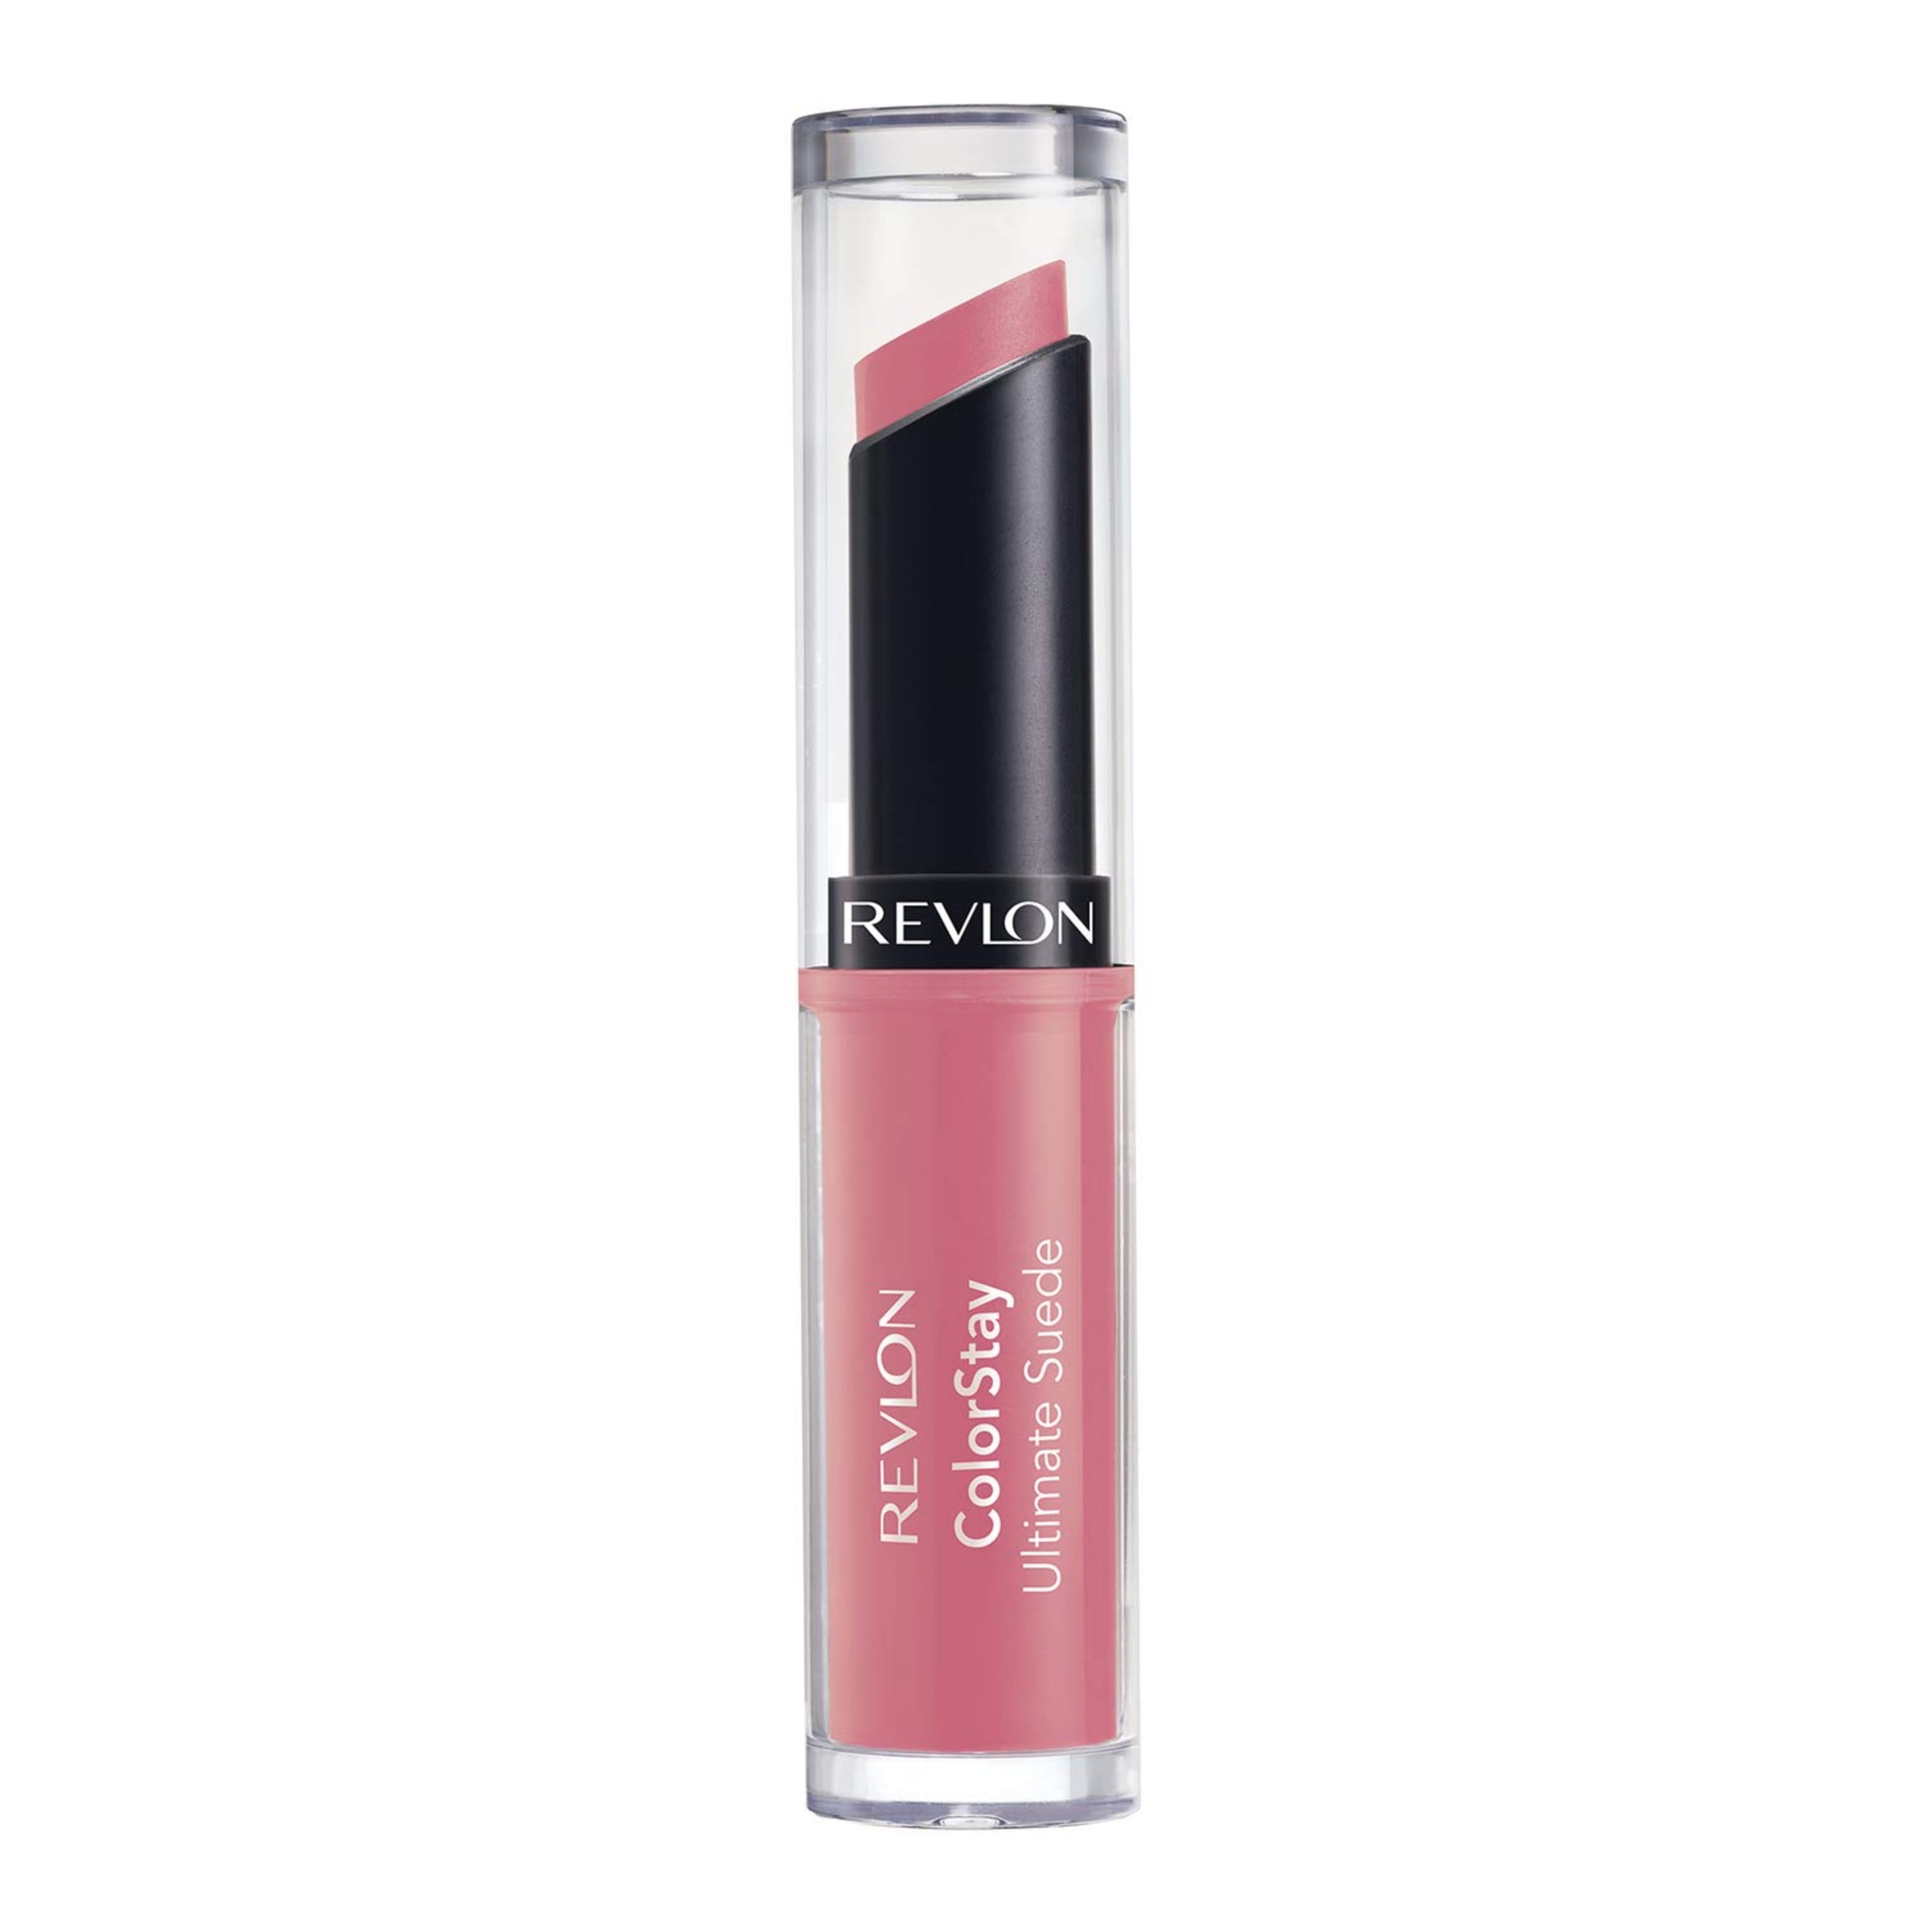 Revlon ColorStay Ultimate Suede Lipstick, Longwear Soft, Ultra-Hydrating High-Impact Lip Color, Formulated with Vitamin E, 070 Preview, 0.09 oz